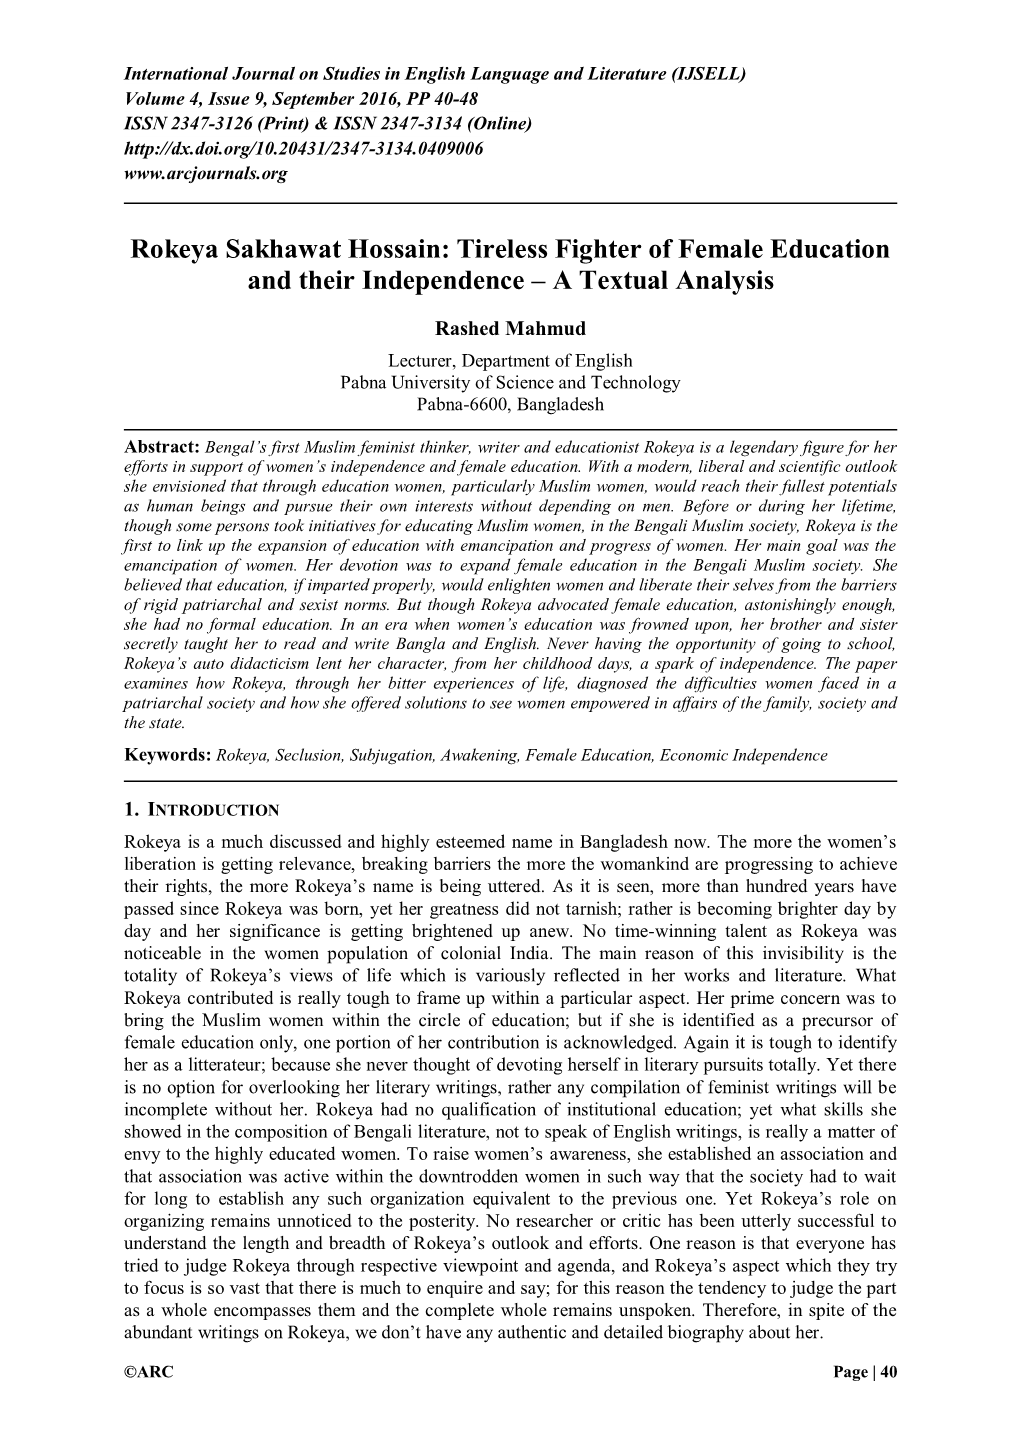 Rokeya Sakhawat Hossain: Tireless Fighter of Female Education and Their Independence – a Textual Analysis